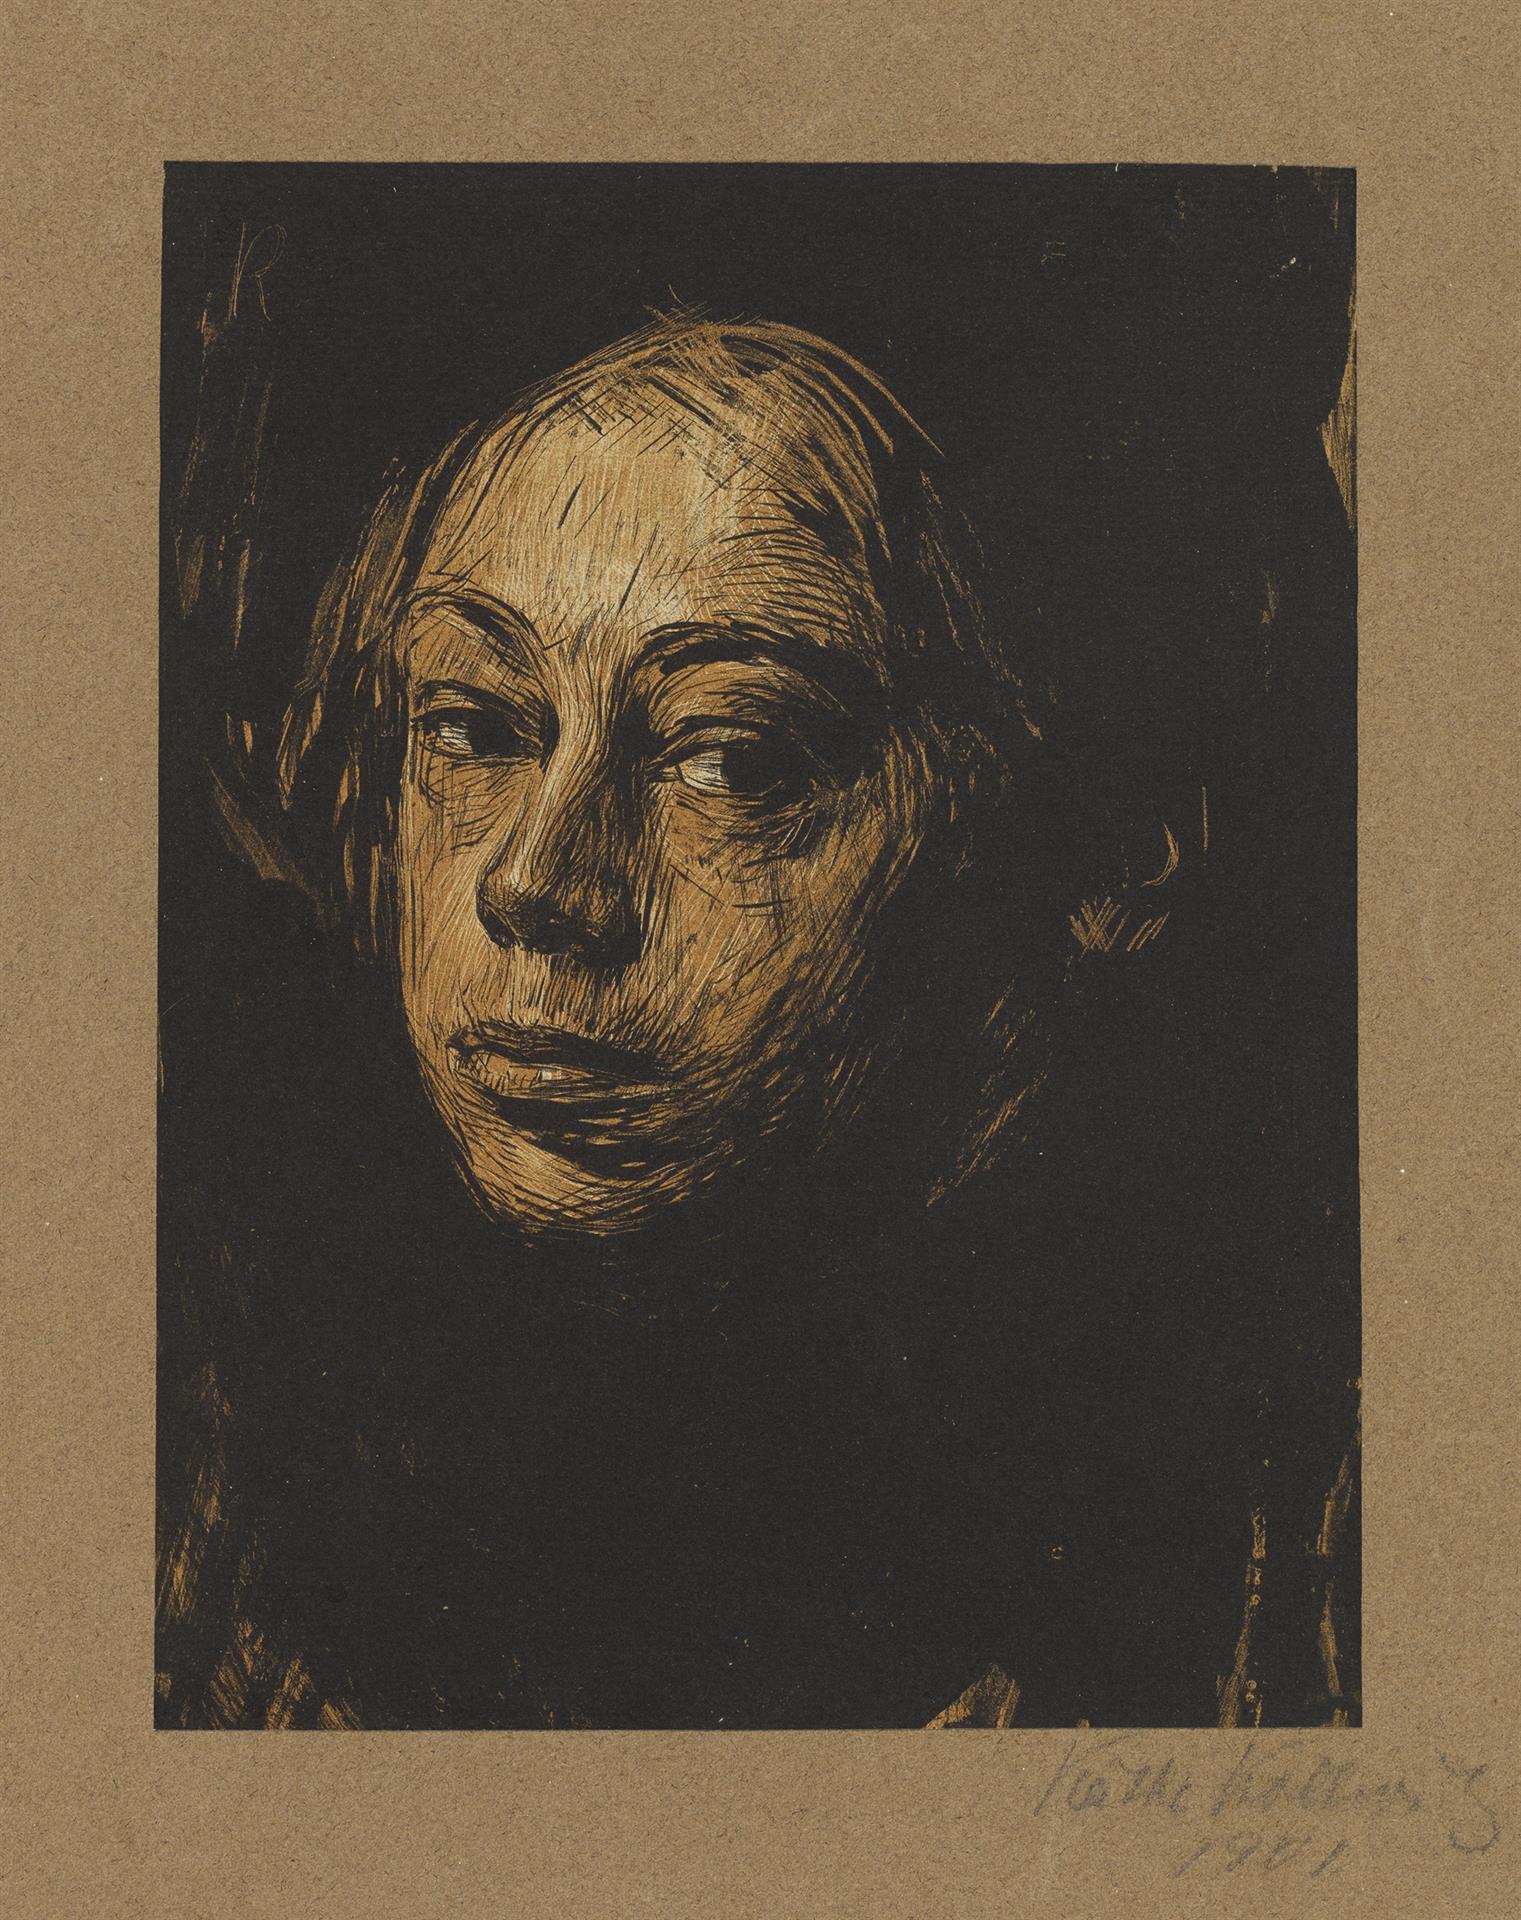 Käthe Kollwitz, Self-portait towards left, 1901, brush and pen lithograph in two colors with scratch technique in the drawing stone and in the tone stone, printed in brown, Kn 52 I, Cologne Kollwitz Collection © Käthe Kollwitz Museum Köln